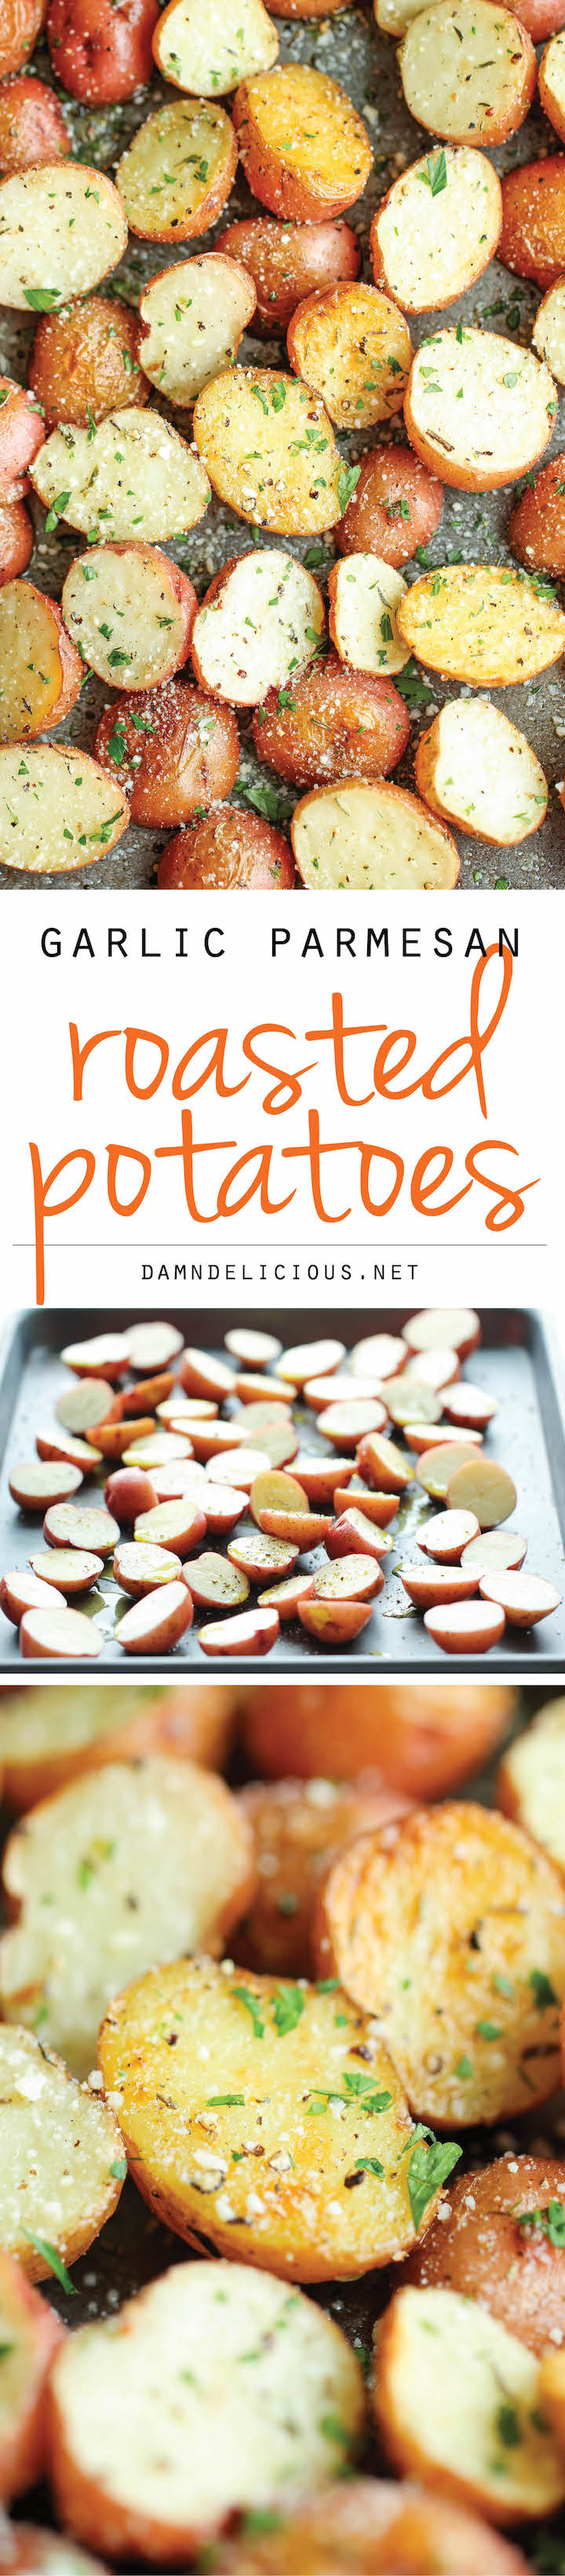 Garlic Parmesan Roasted Potatoes - These buttery garlic potatoes are tossed with Parmesan goodness and roasted to crisp-tender perfection!